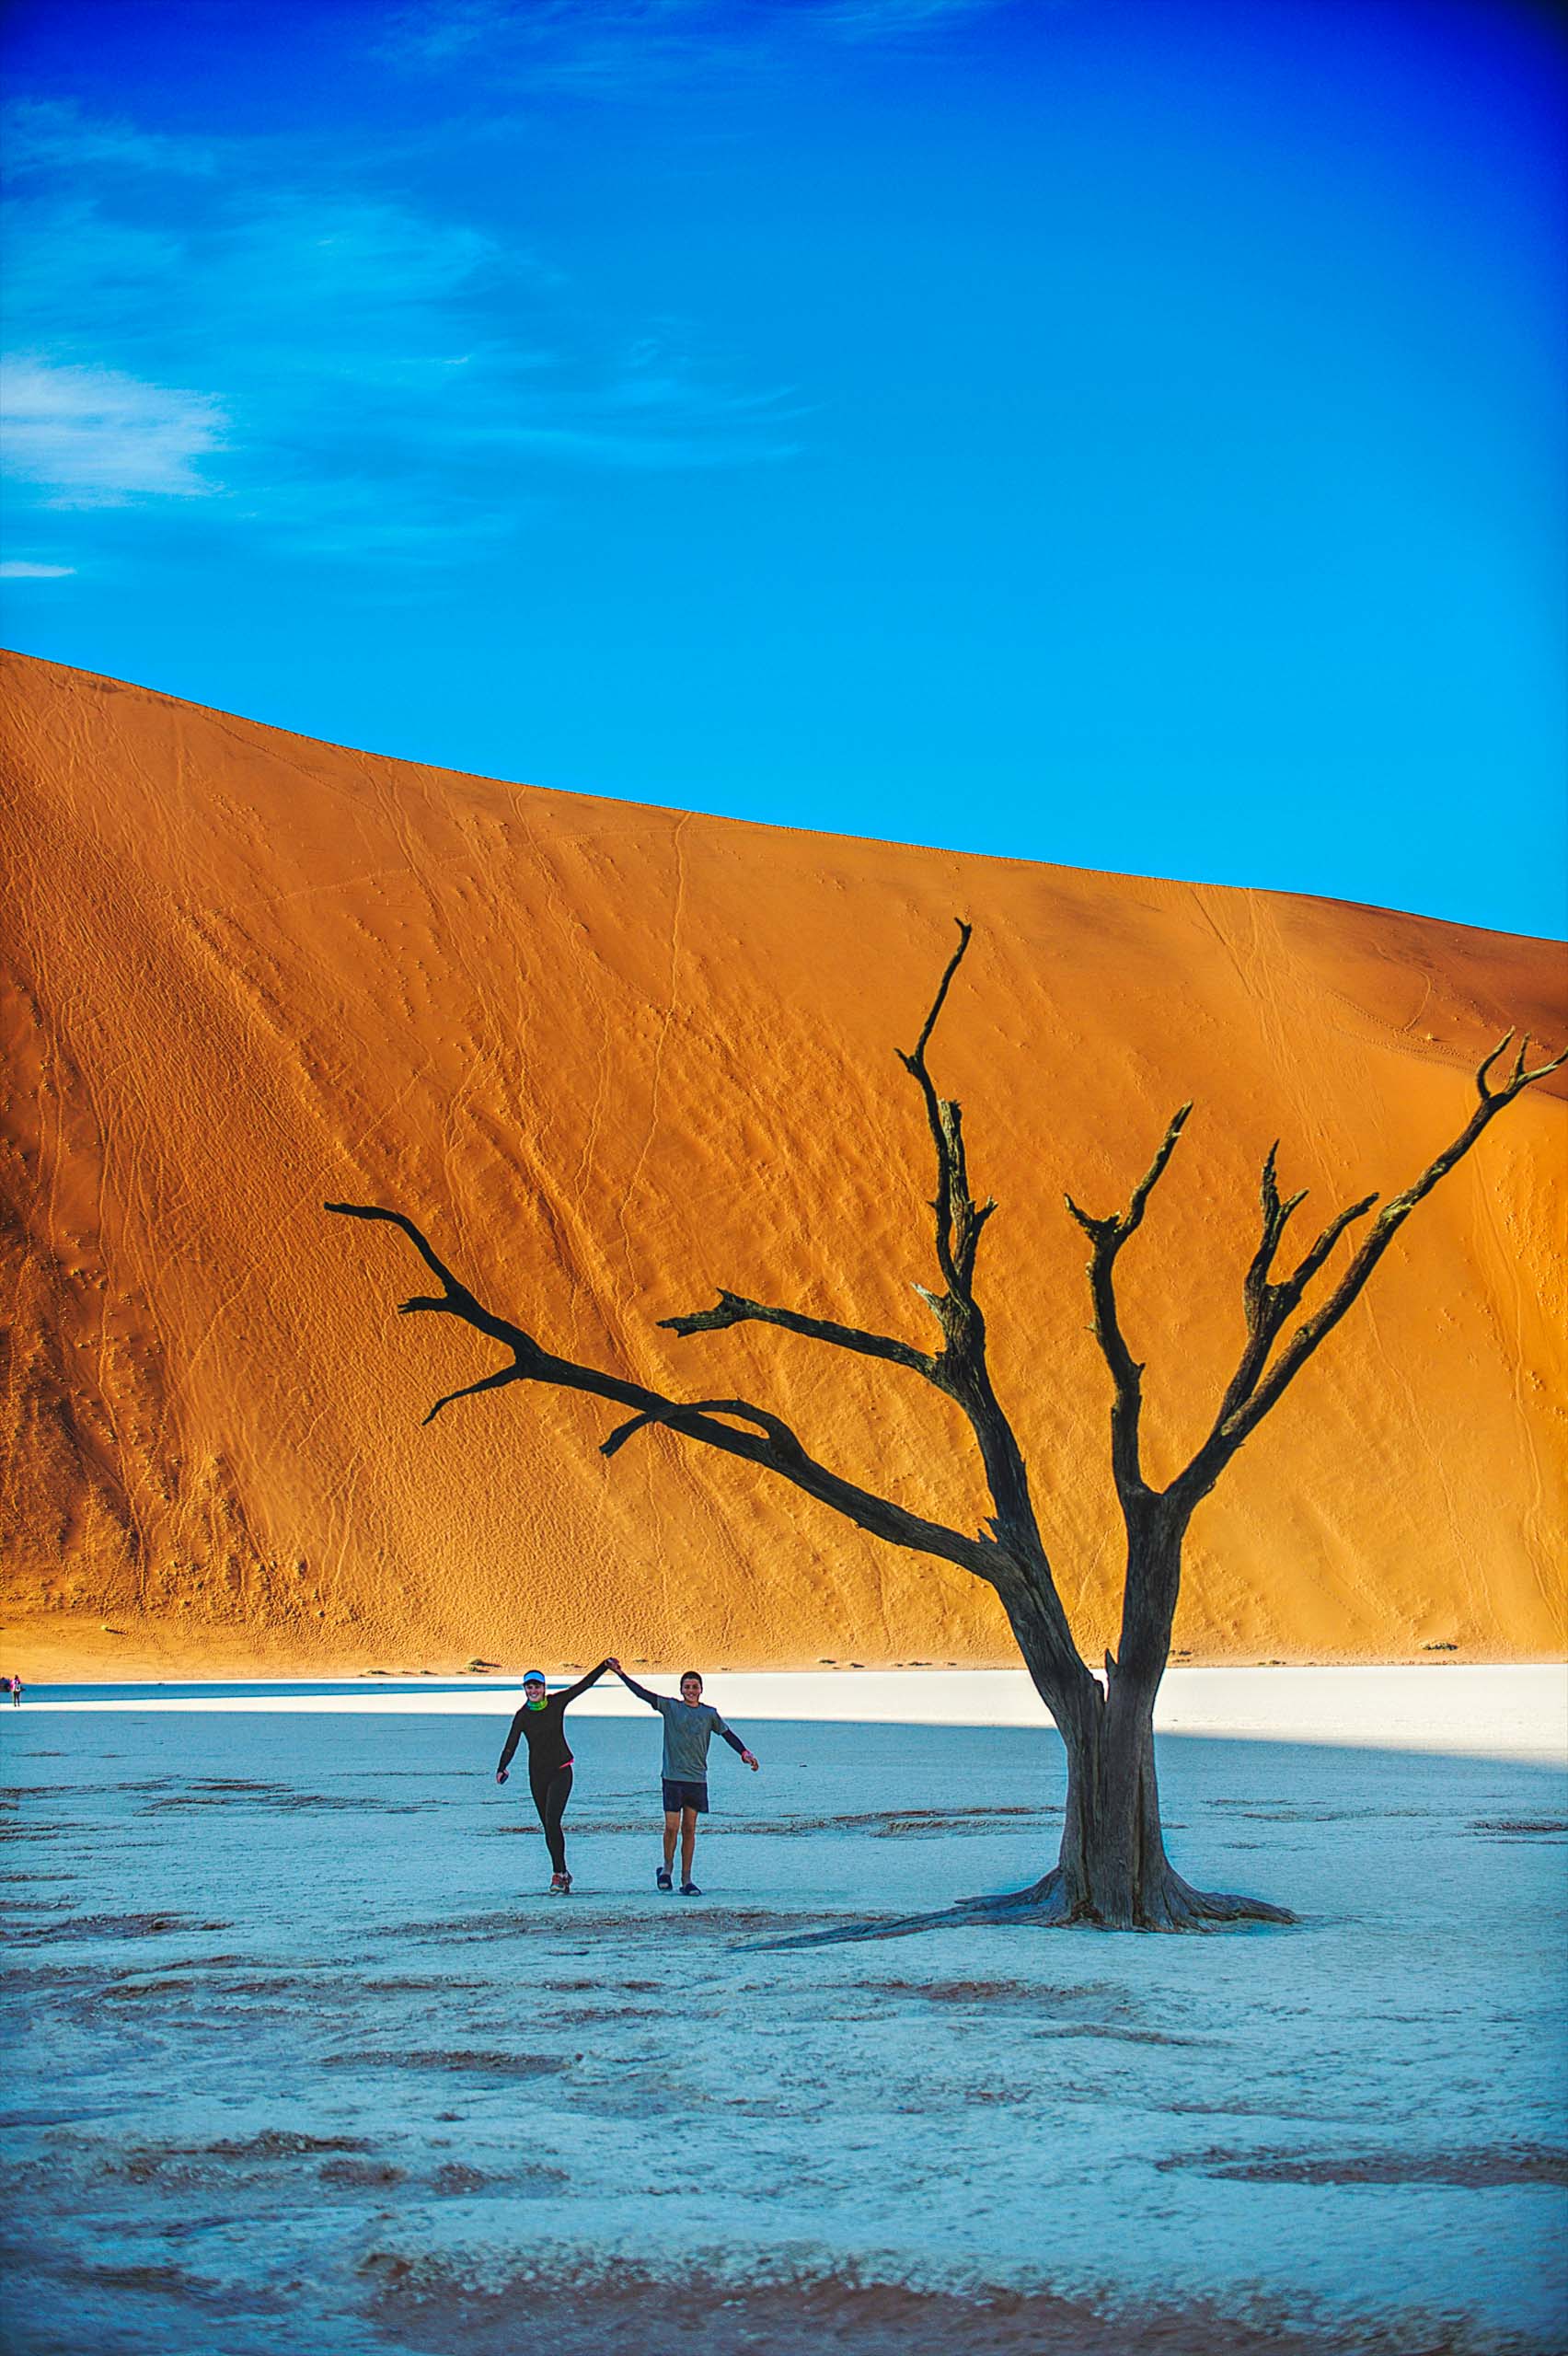 A young girl and young boy holding hands running together over the clay salt pan smiling between the Dead Vlei trees.